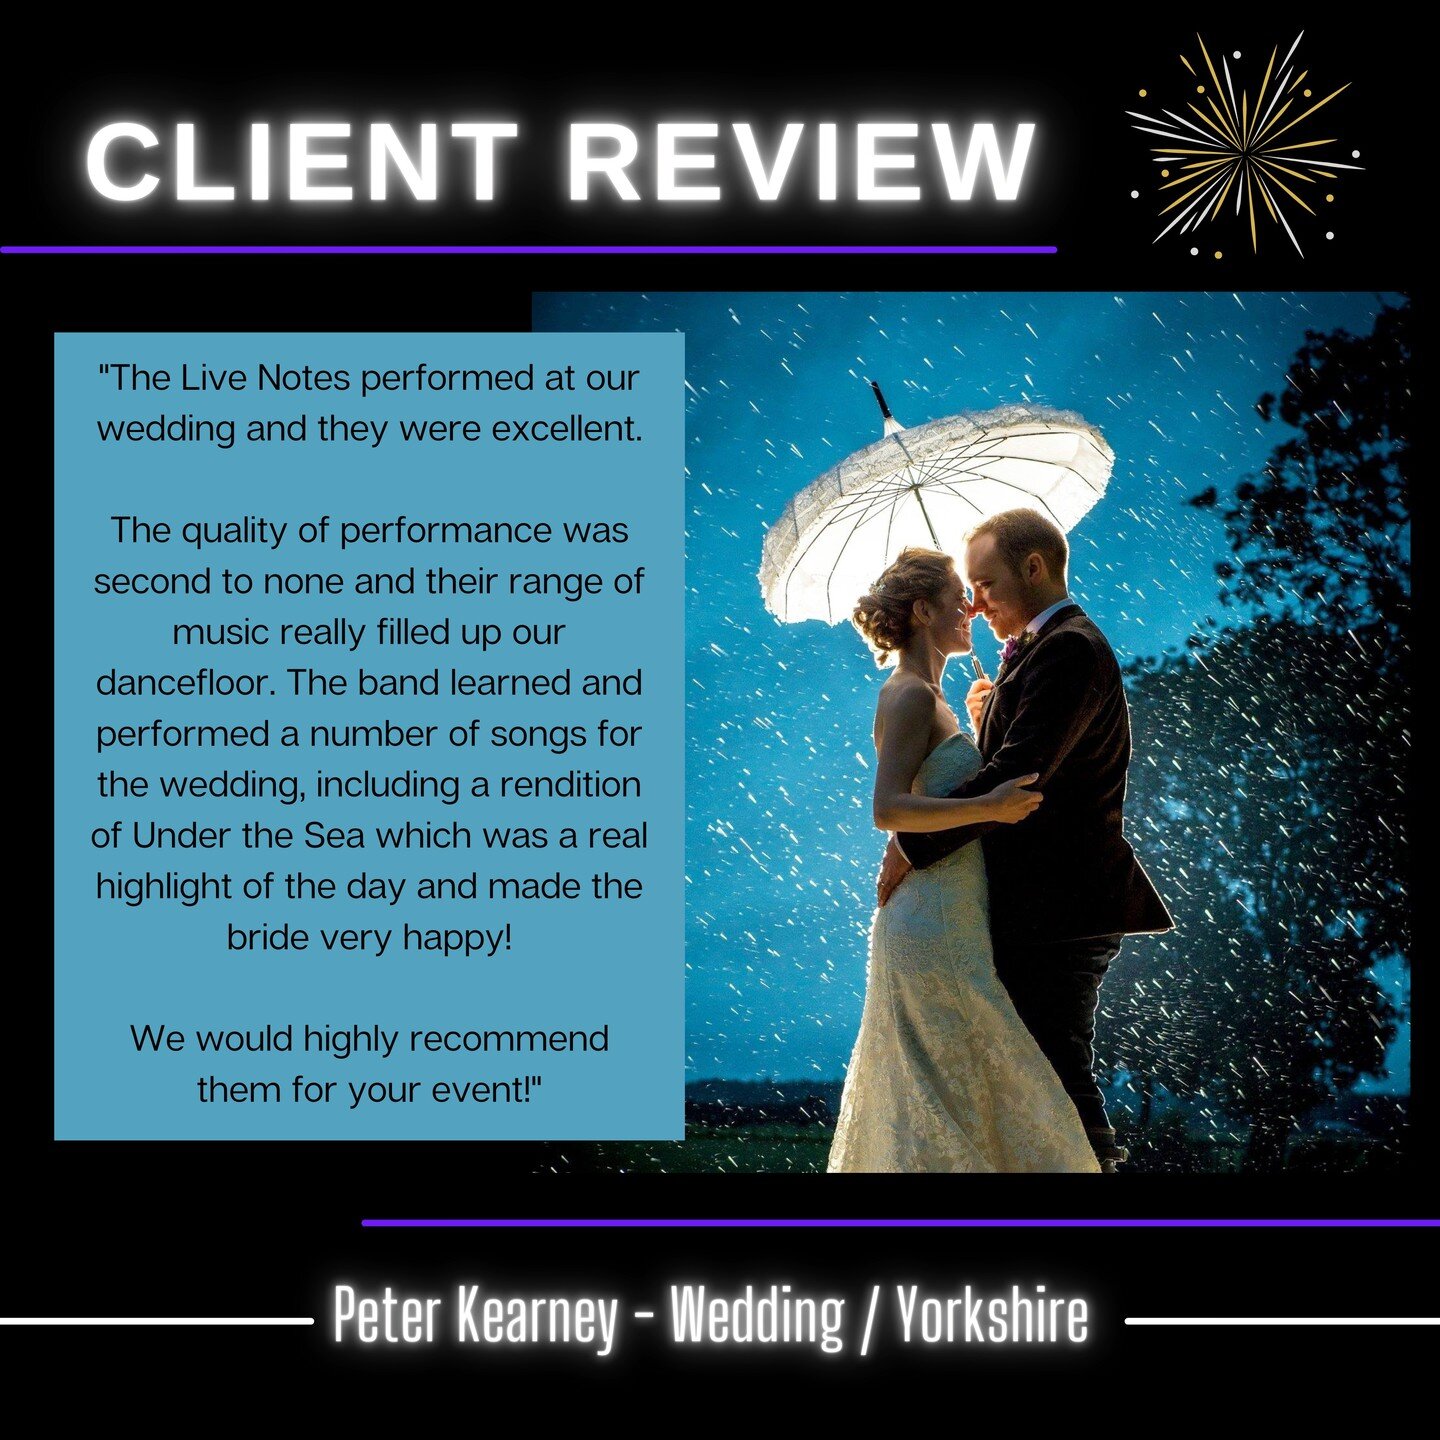 Fantastic review from a great client, Peter Kearney.

As well as being amazing guests, I think these guys win the award for &quot;Wedding Photo Of The Year&quot; ❤️ 🔥

Our 6 Piece Band was the perfect fit for this outdoor Marquee wedding with female